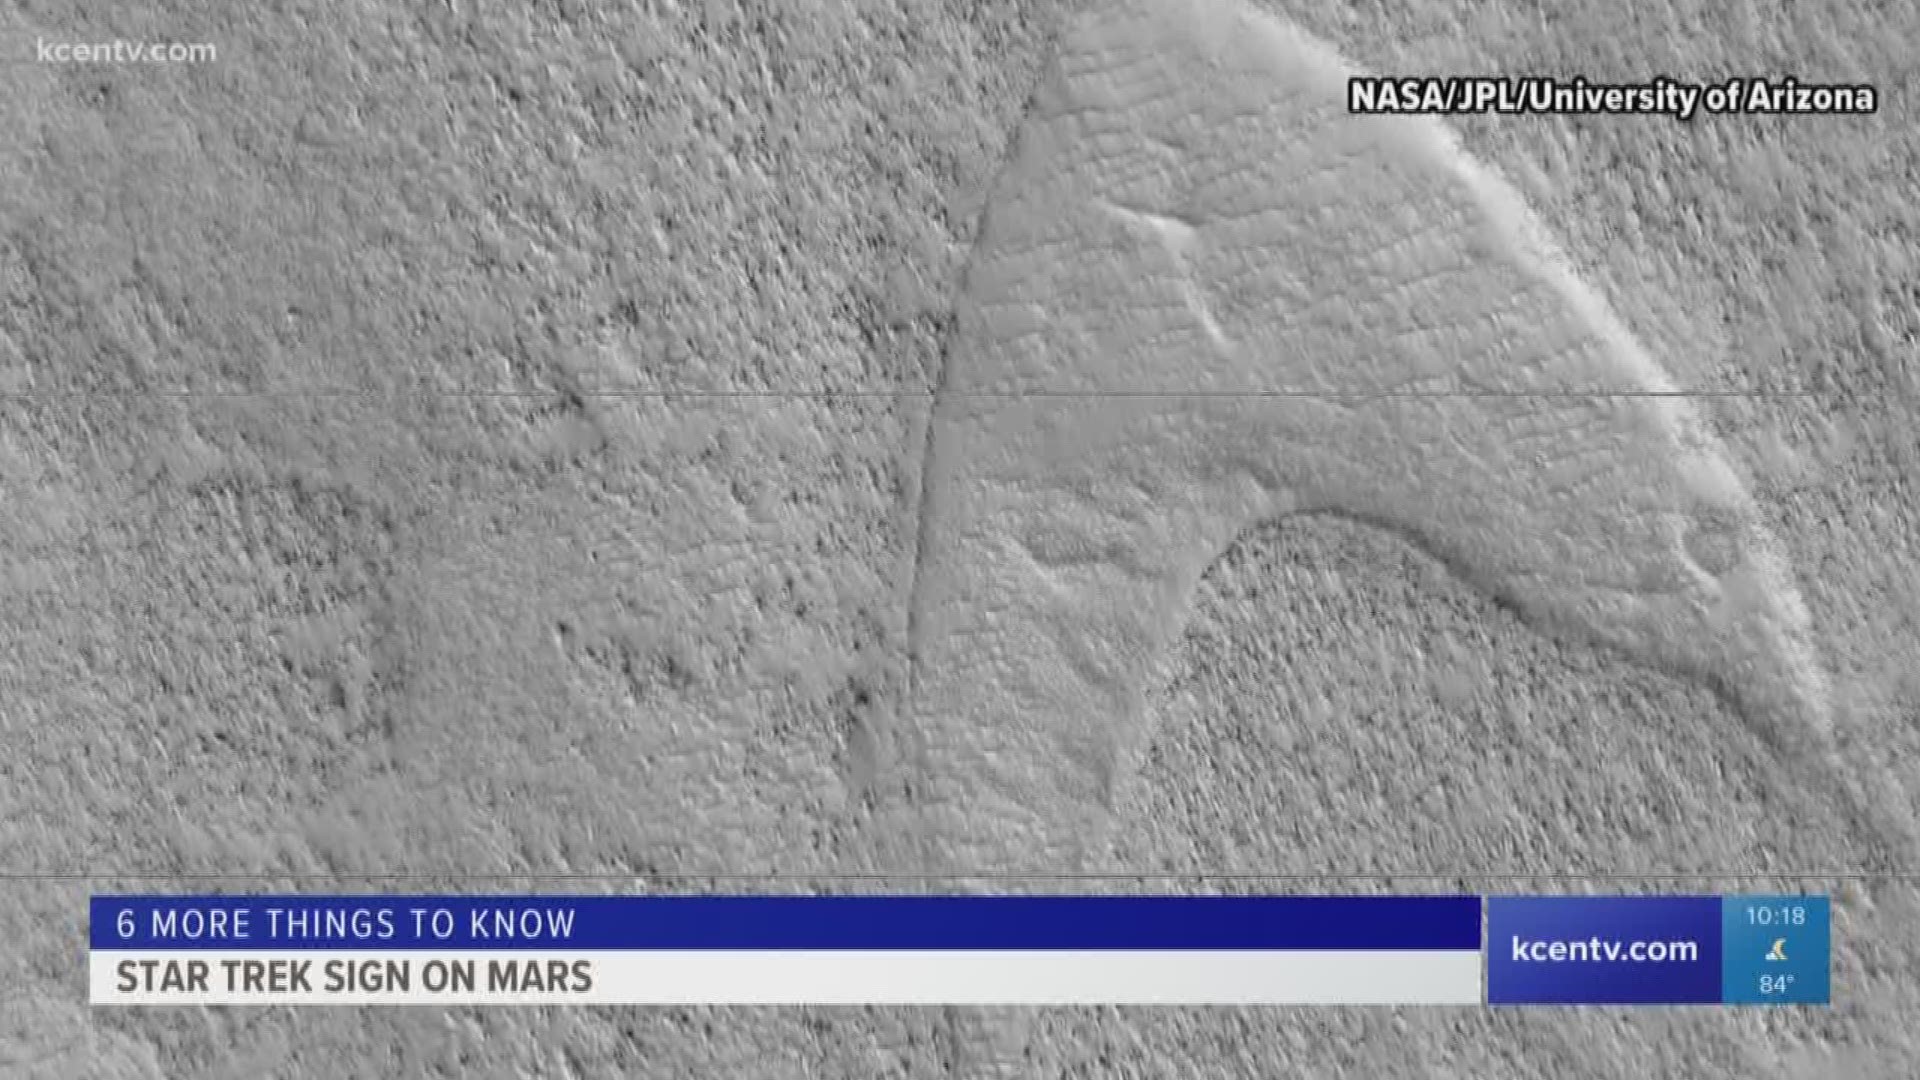 According to scientists, wind and lava caused the Starfleet logo to appear on Mars' surface.